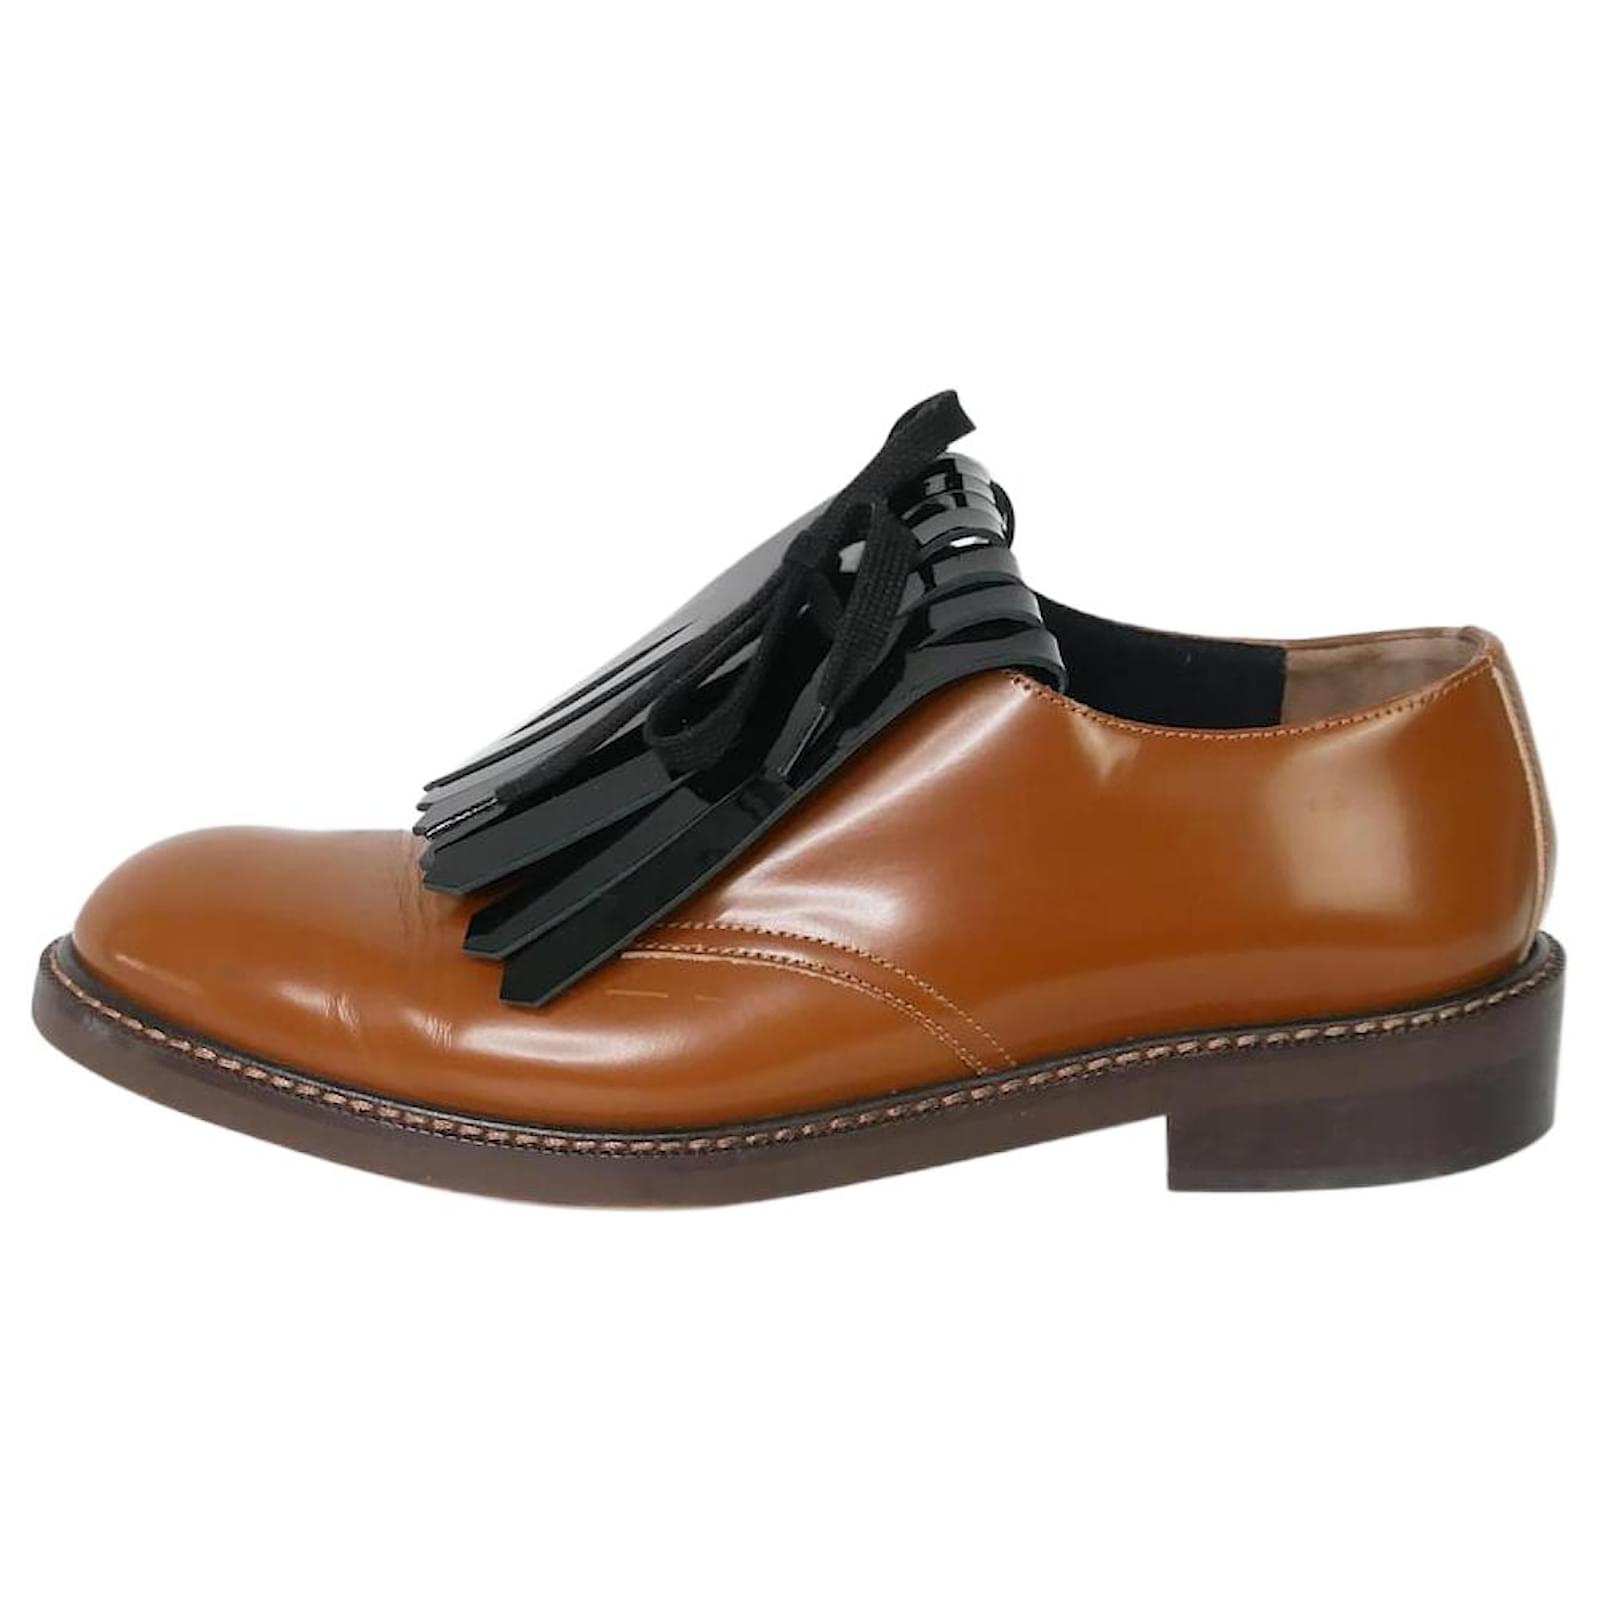 MARNI LEATHER DRESS SHOES BROWN-